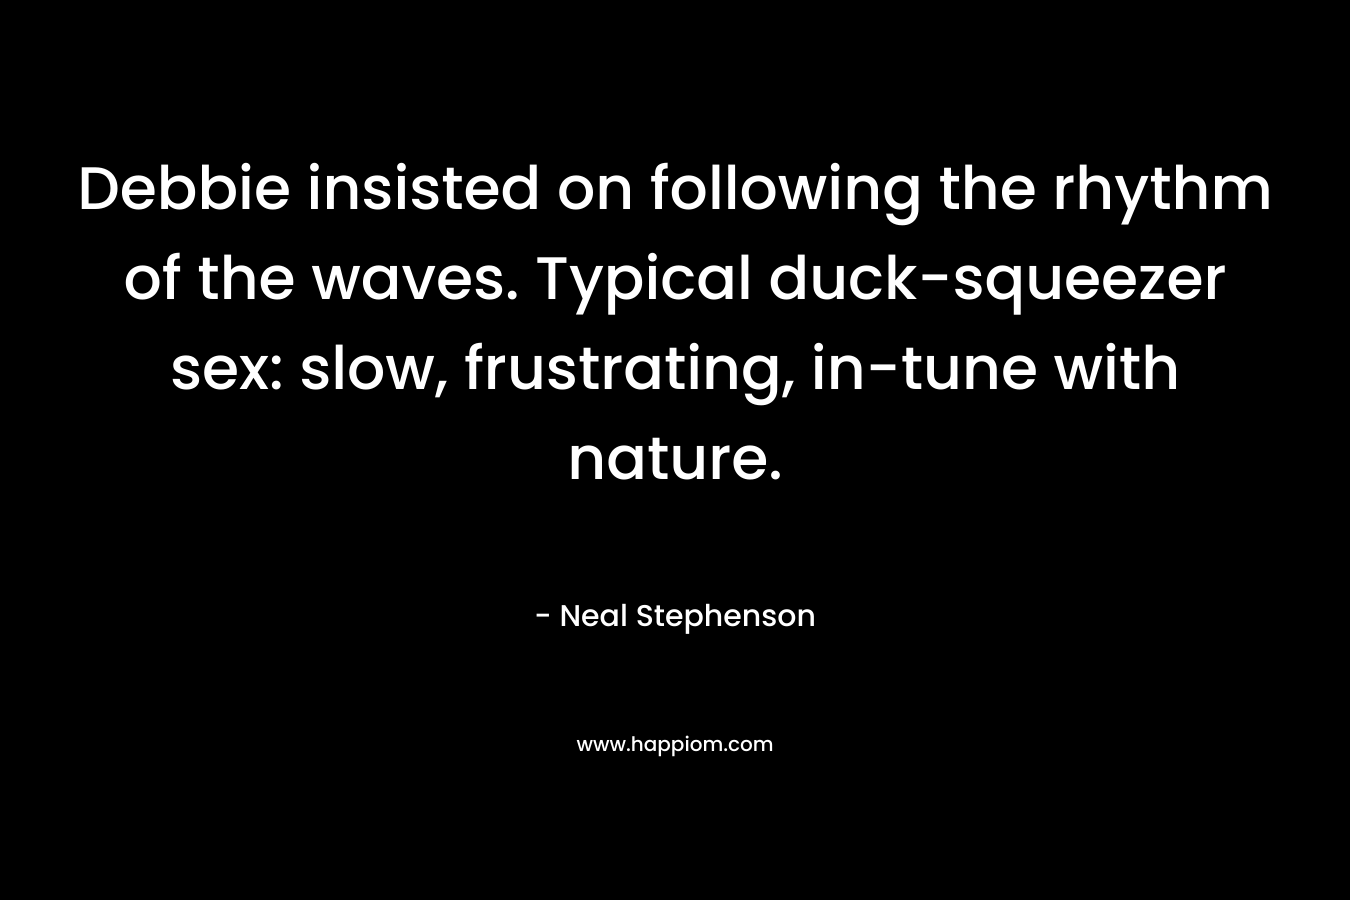 Debbie insisted on following the rhythm of the waves. Typical duck-squeezer sex: slow, frustrating, in-tune with nature. – Neal Stephenson